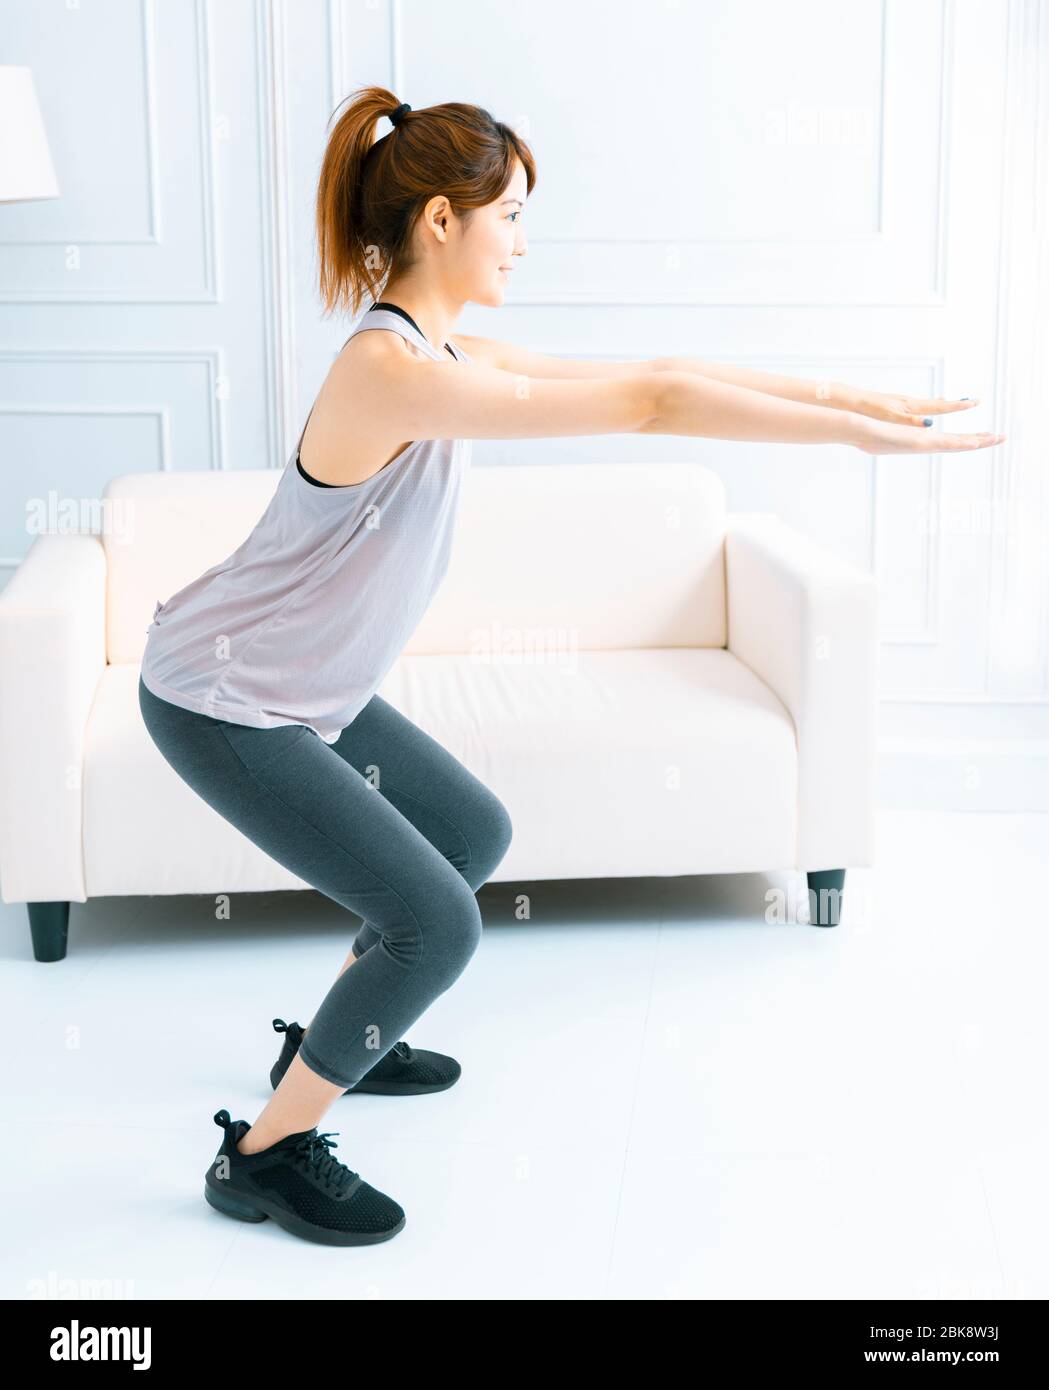 Young woman doing exercise at home in the living room Stock Photo